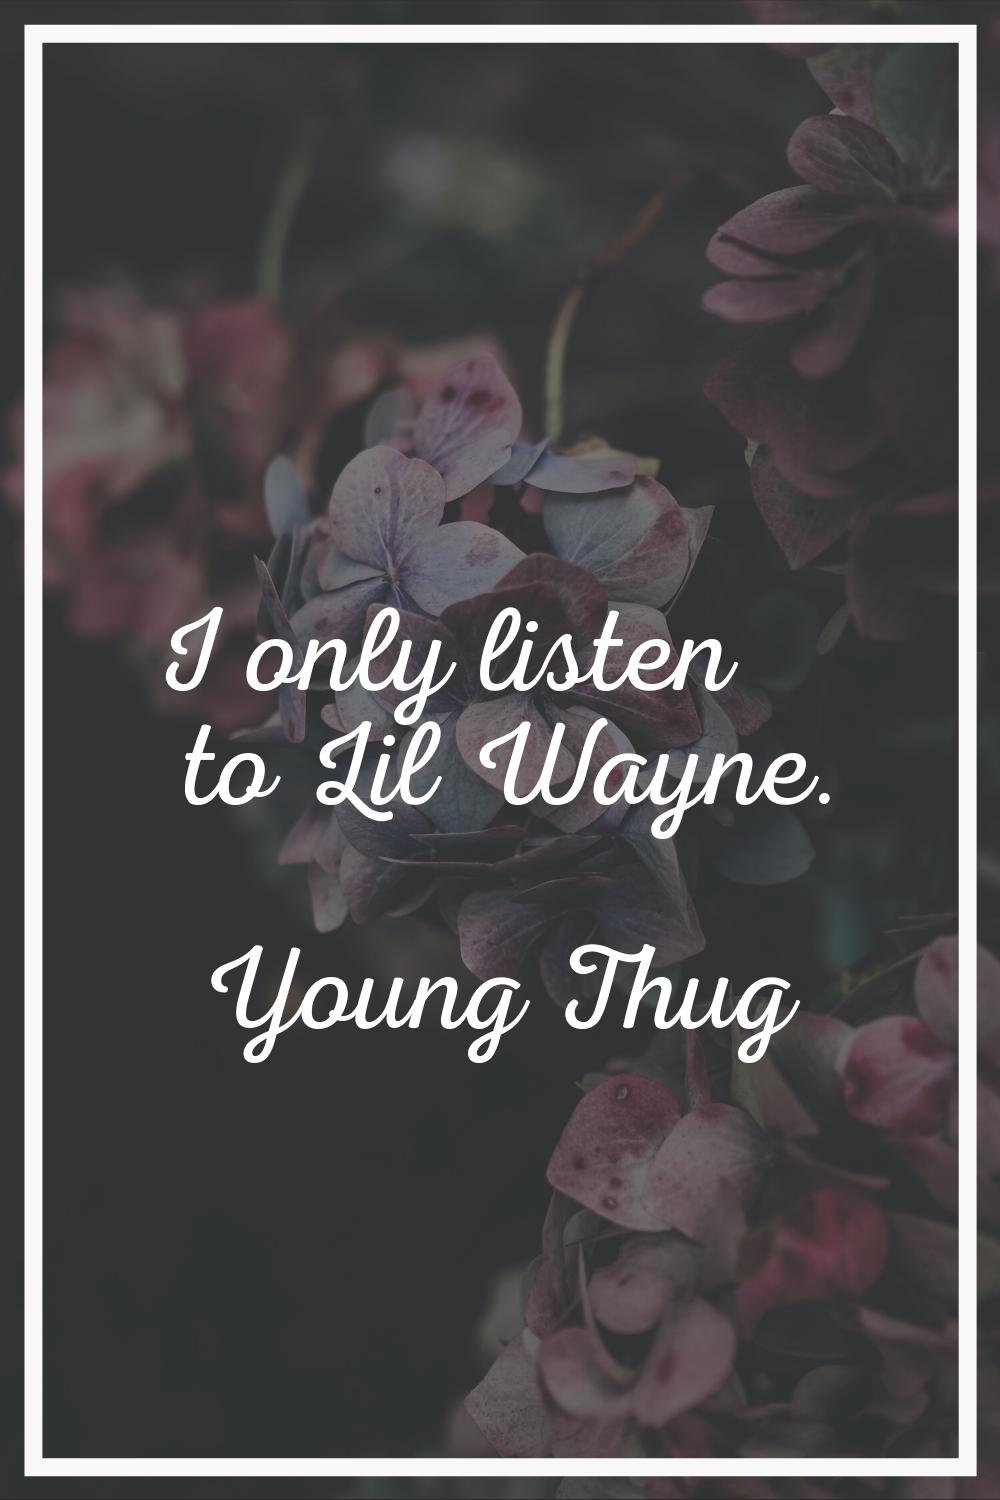 I only listen to Lil Wayne.